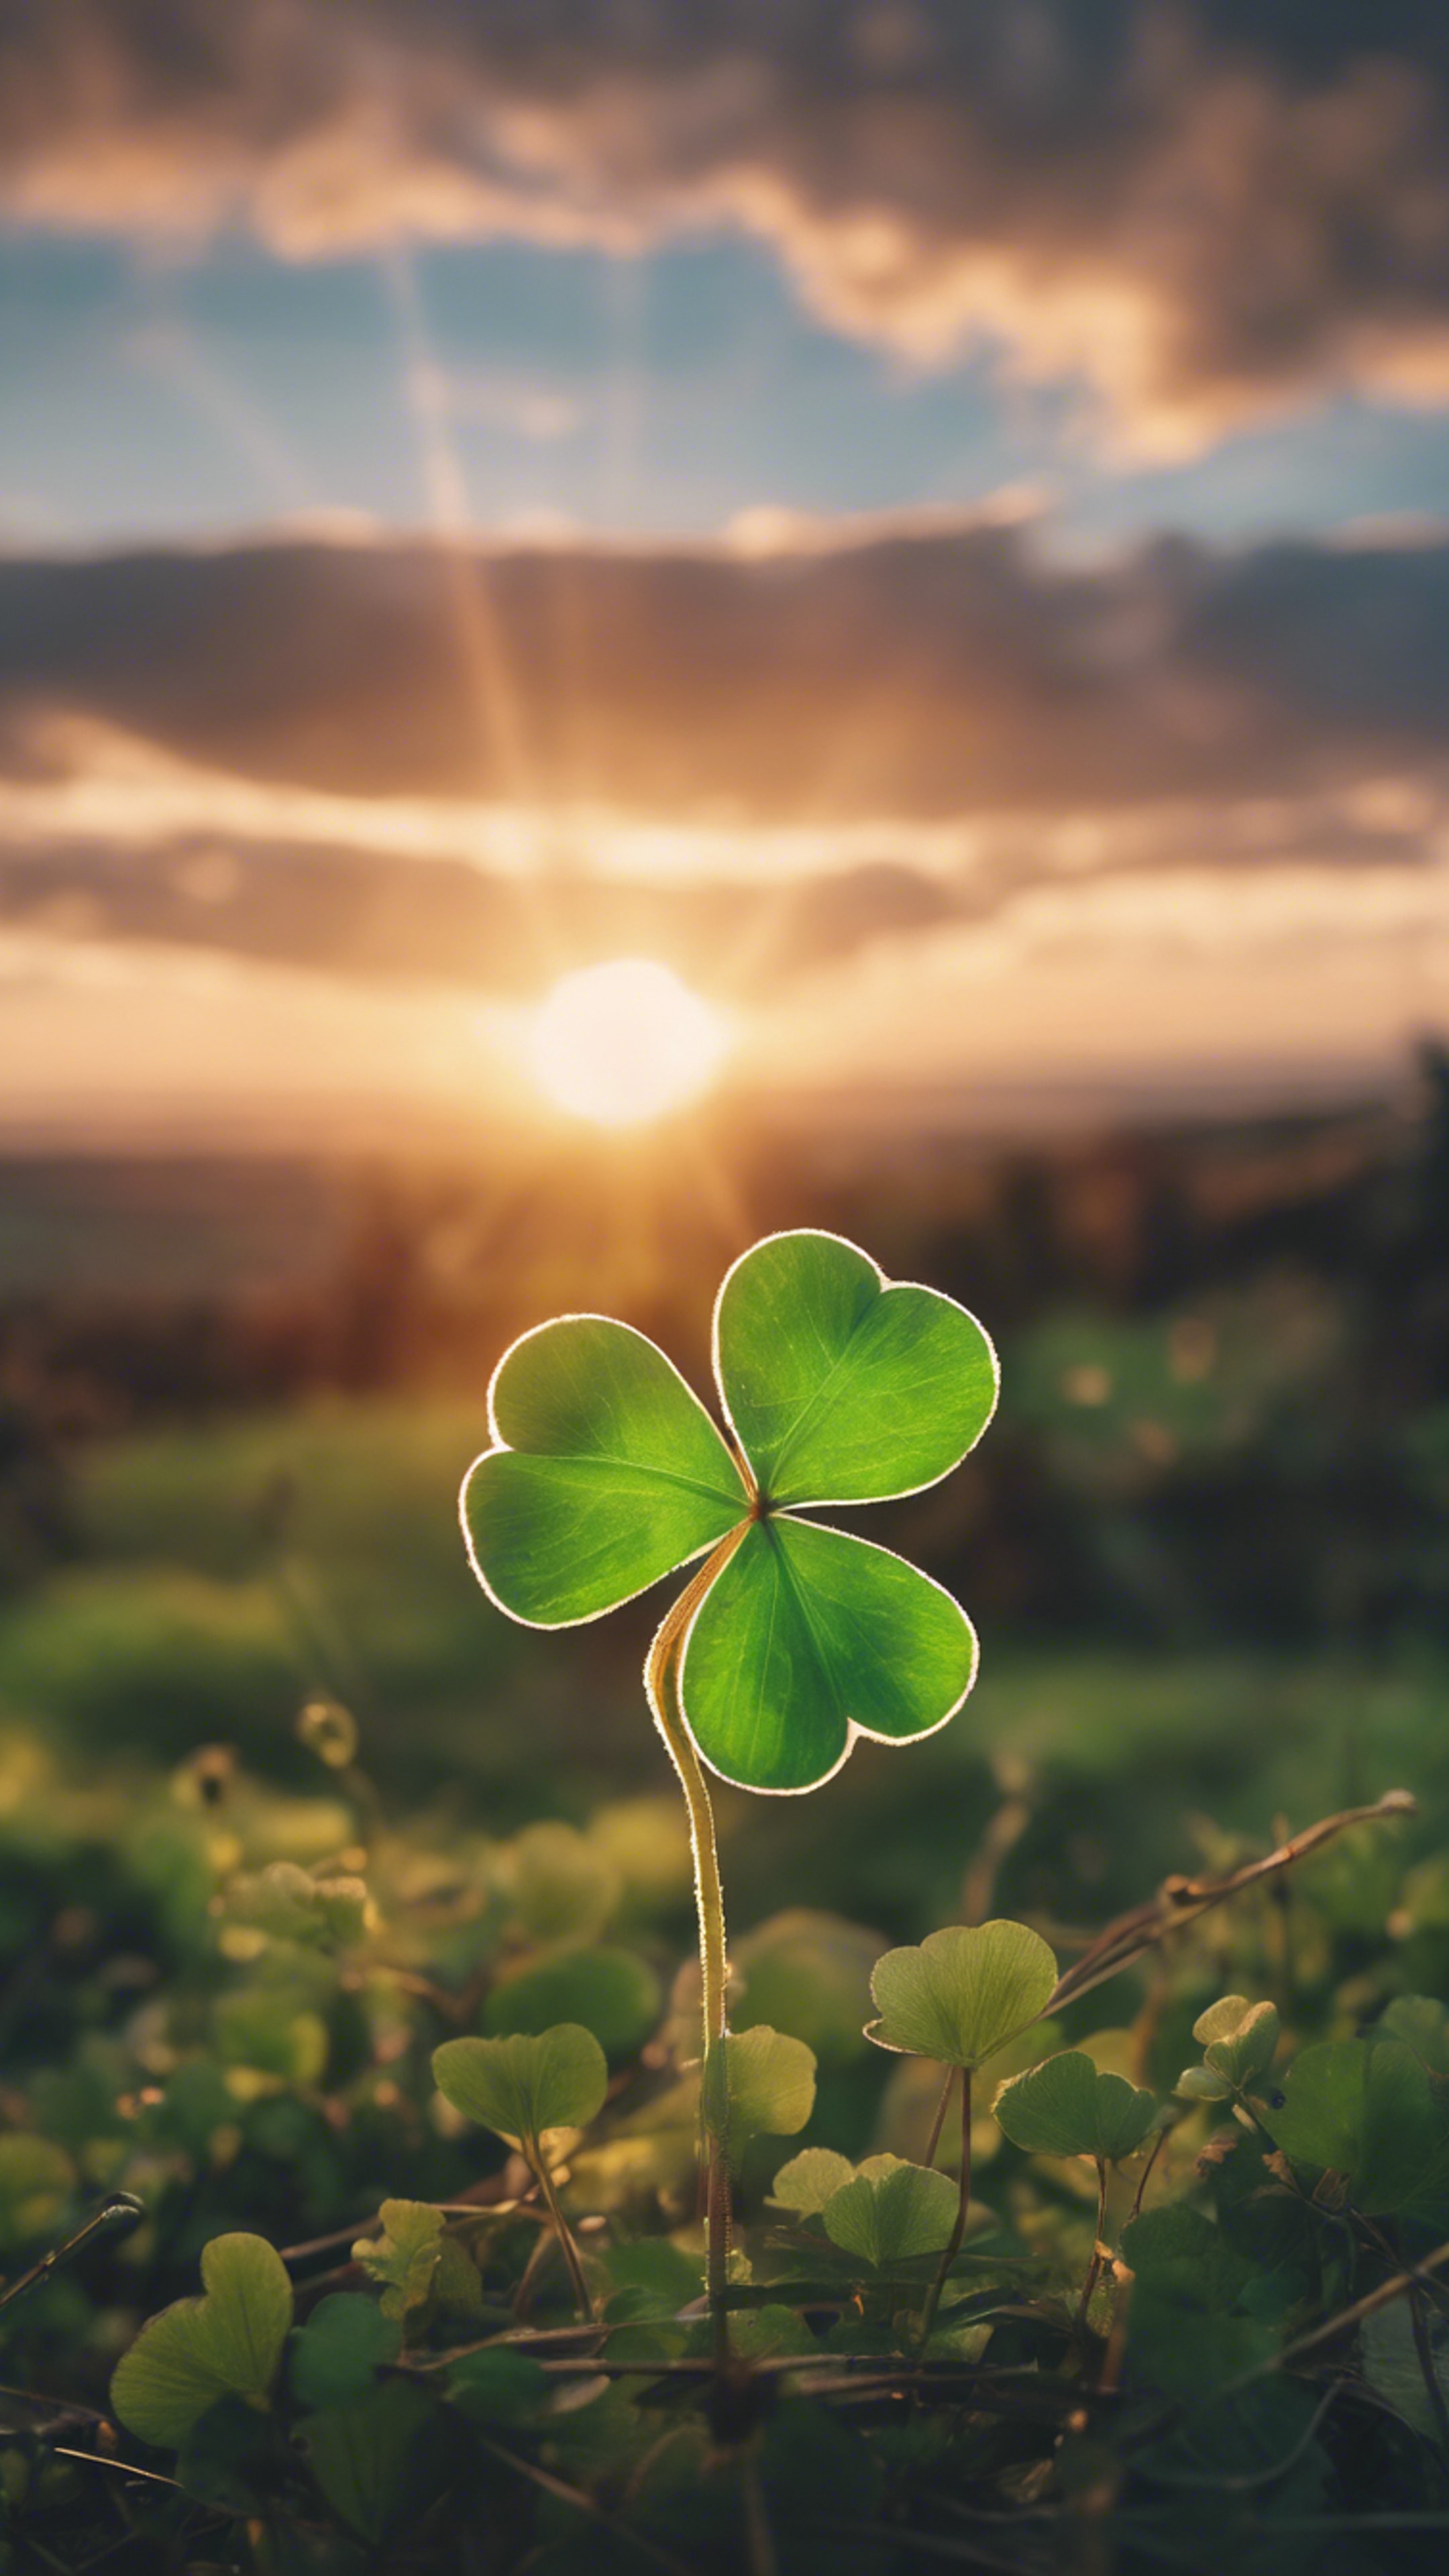 An enchanting sunset over the Irish countryside with a four-leaf clover in the foreground on St. Patrick's Day. Wallpaper[4ad1db603cc8494da5b1]